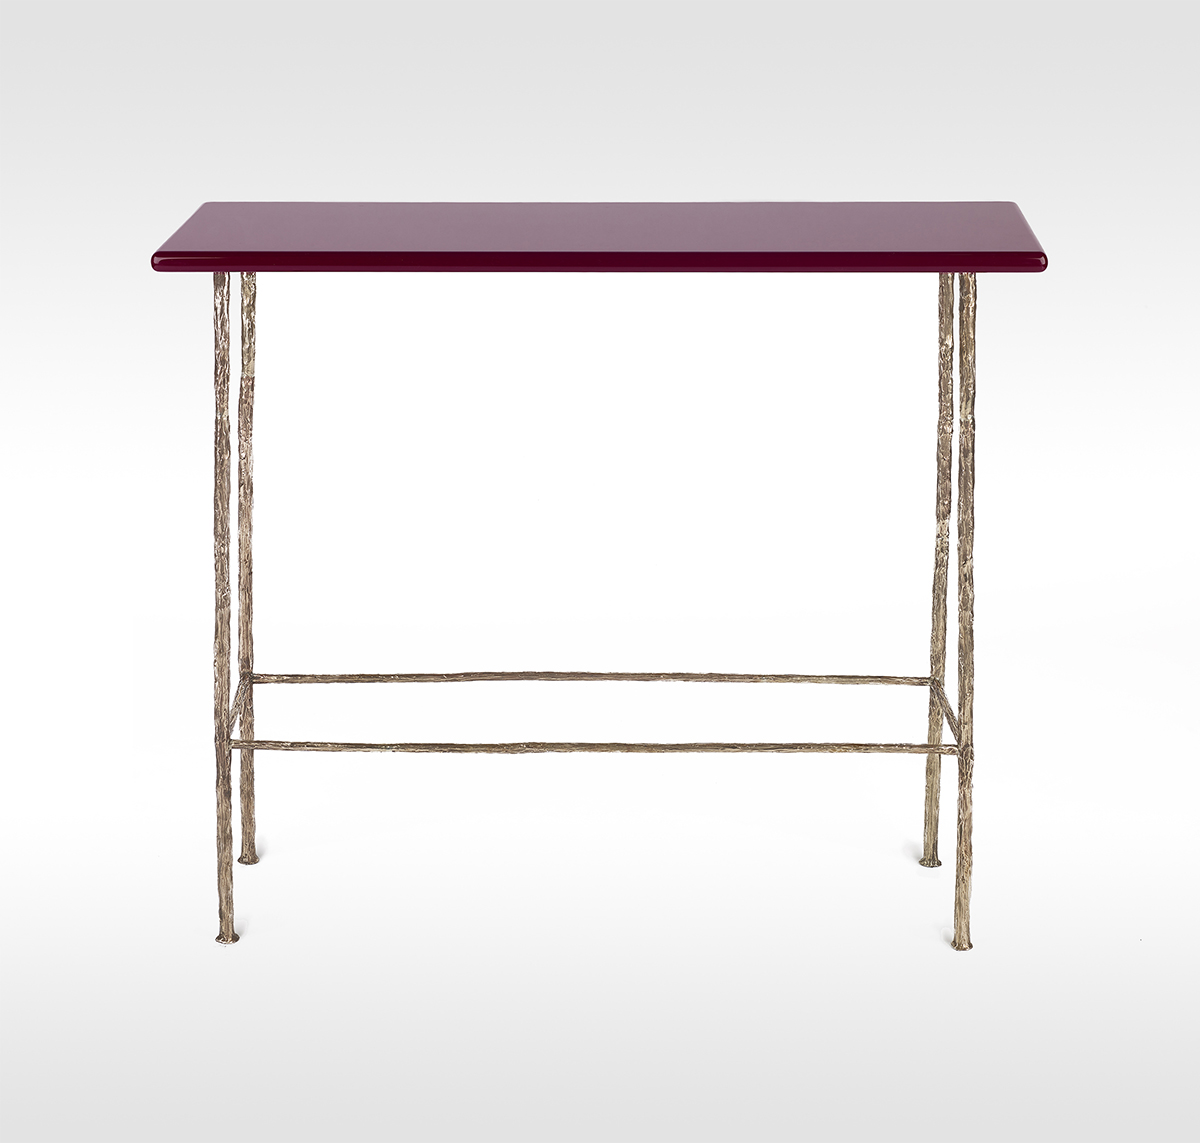 Alga Consolle in Bronze with Natural Wood Laquered in Red